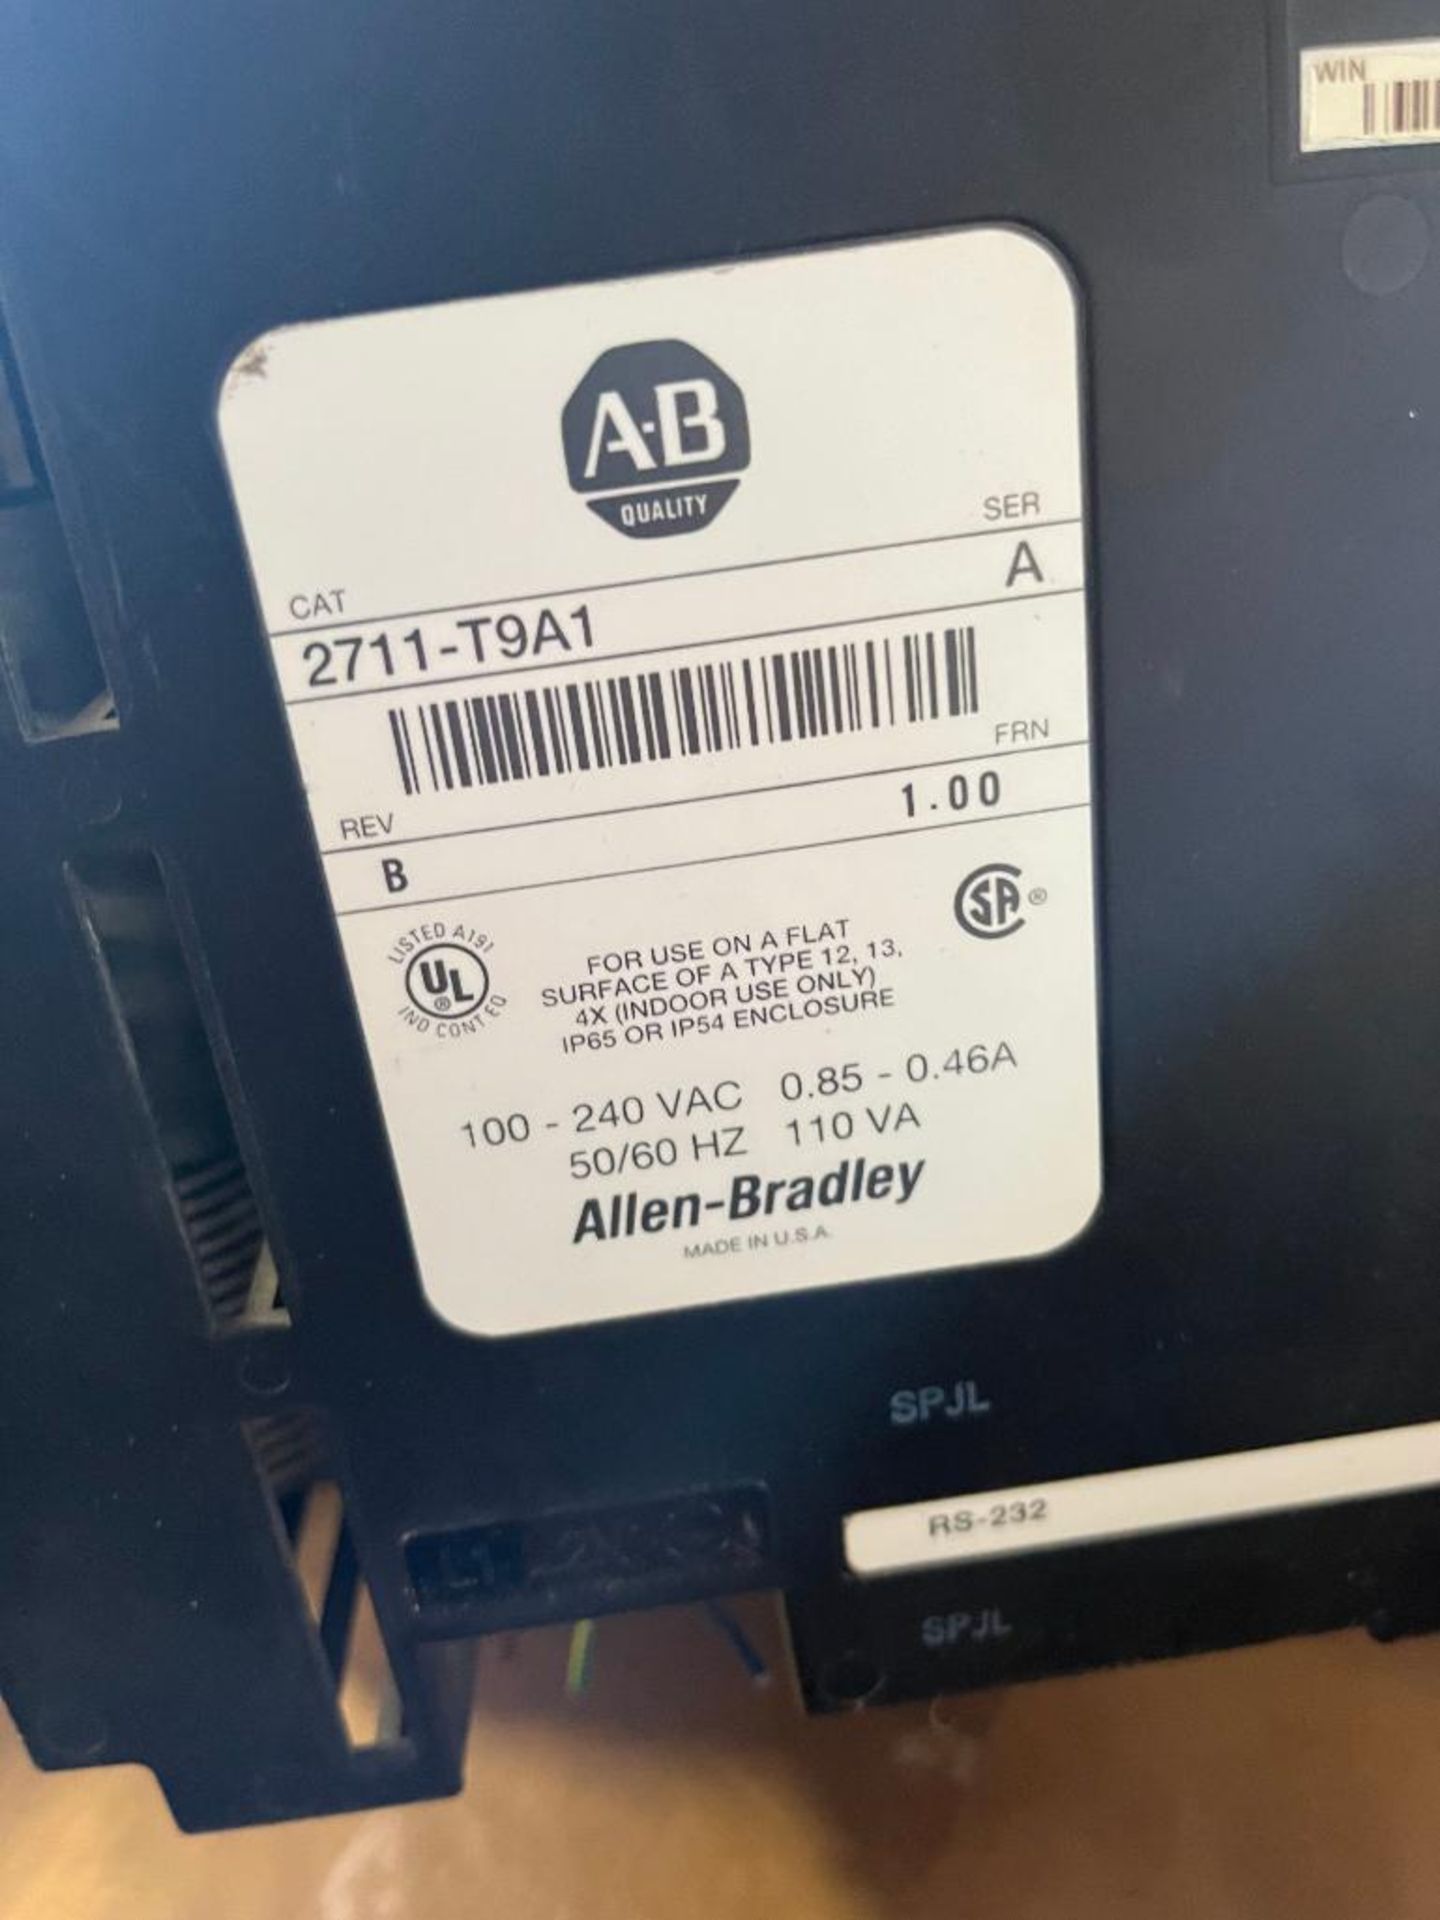 (2) Allen-Bradley PanelView 900, Catalog Number 2711-T9A1, Series B, 240 VAC w/ PLC Card - Image 4 of 5